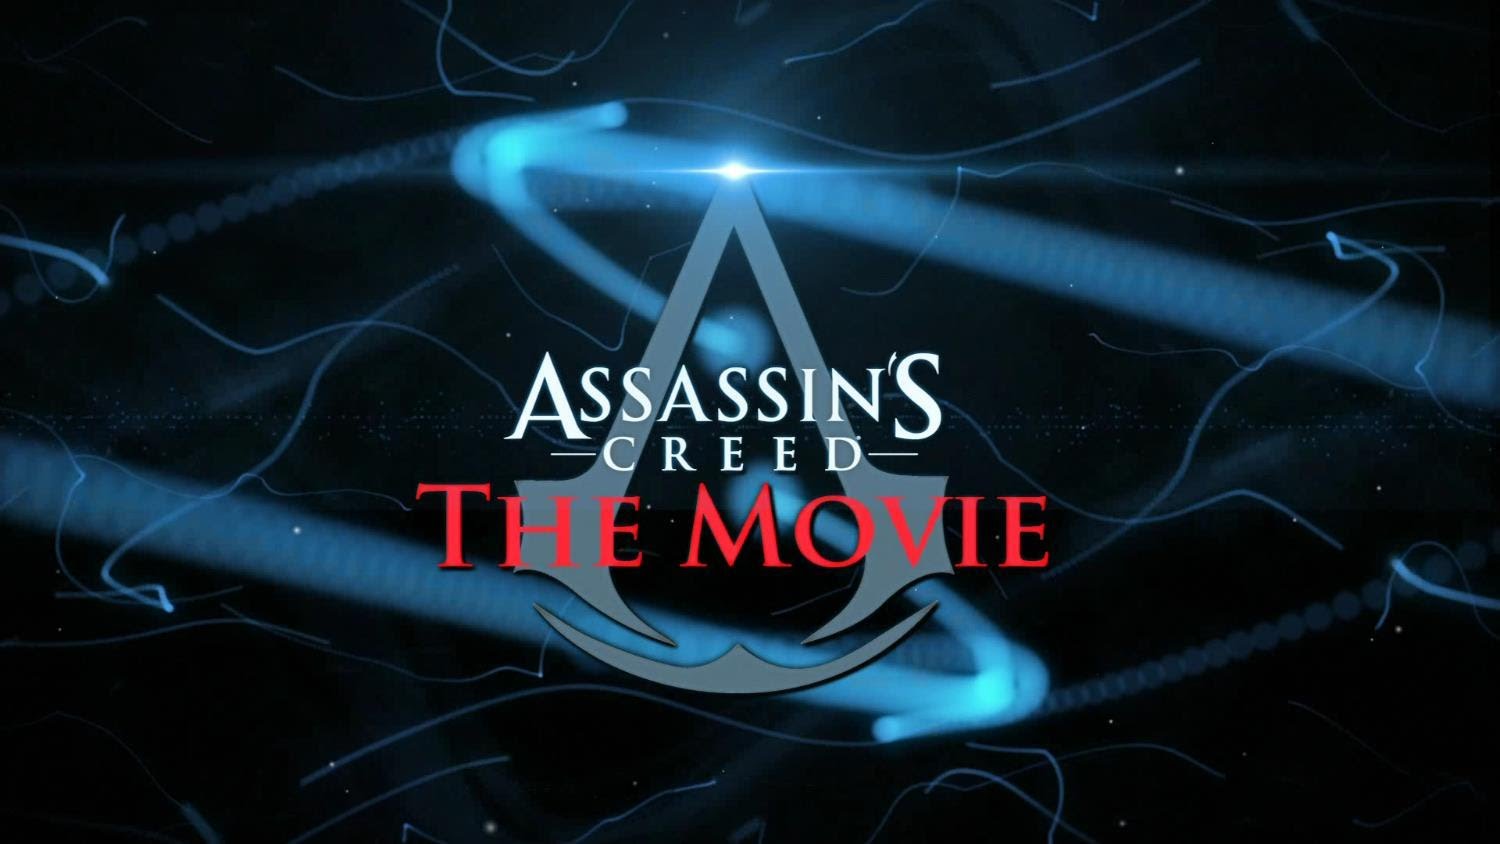 Póster de Assassin's Creed, the movie